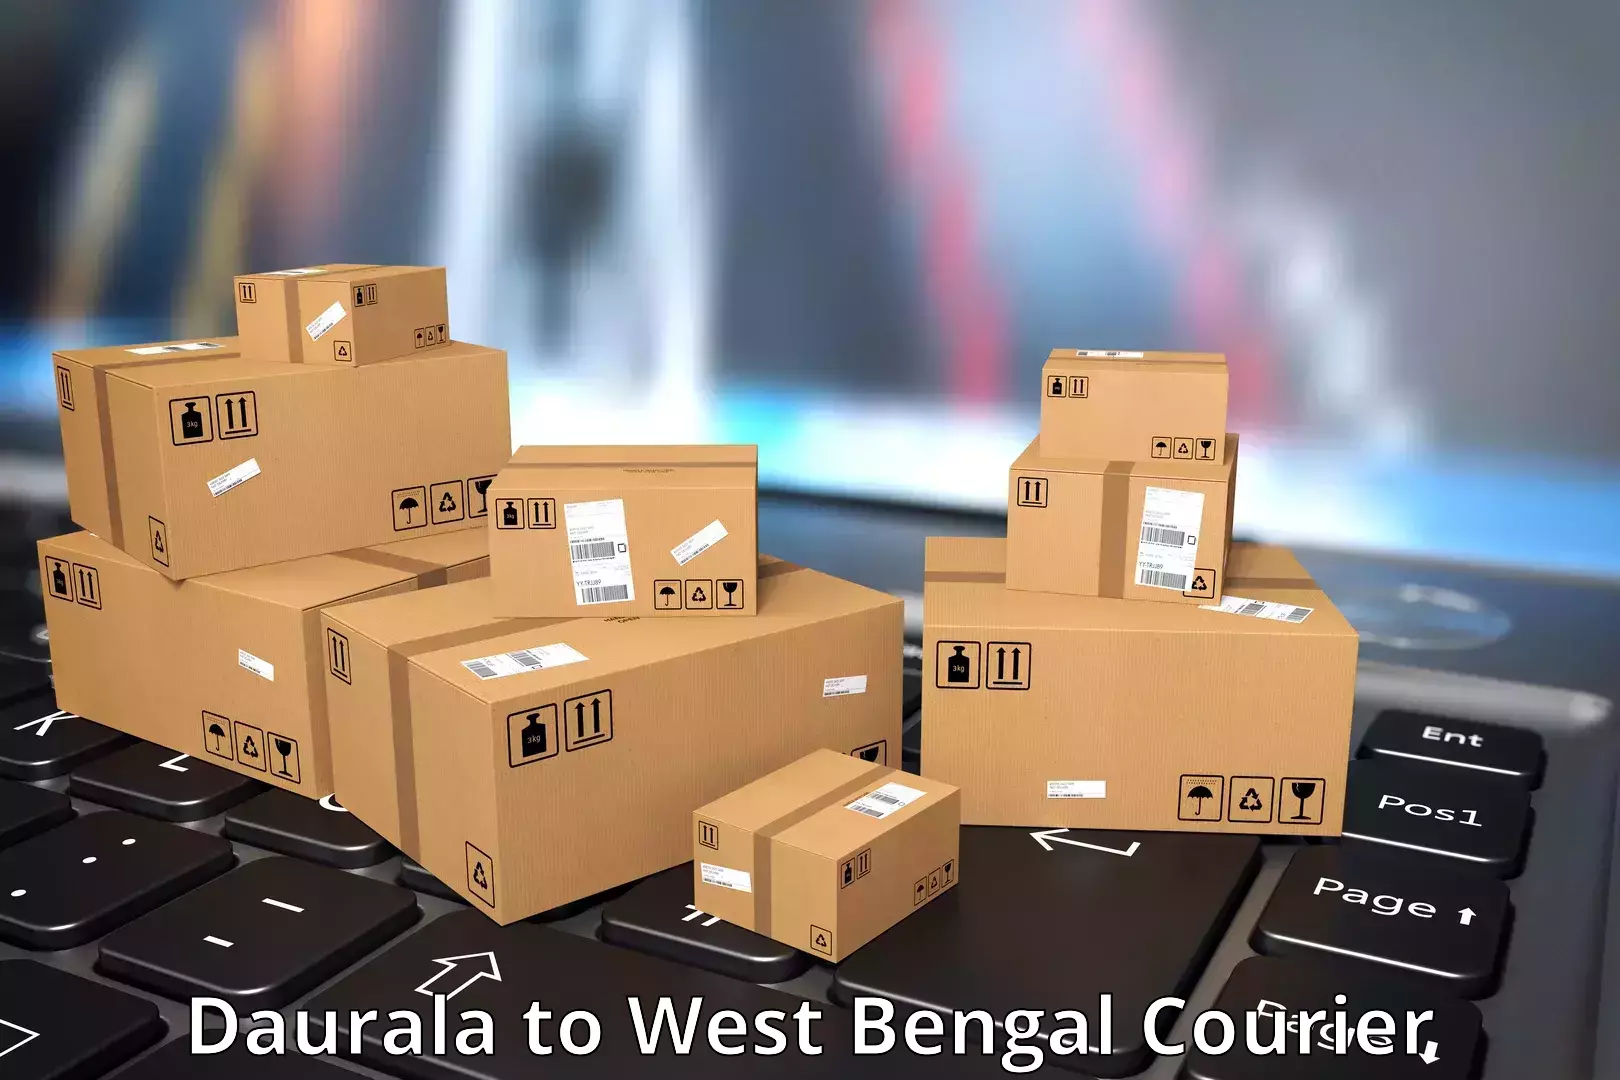 Multi-national courier services Daurala to Park Street